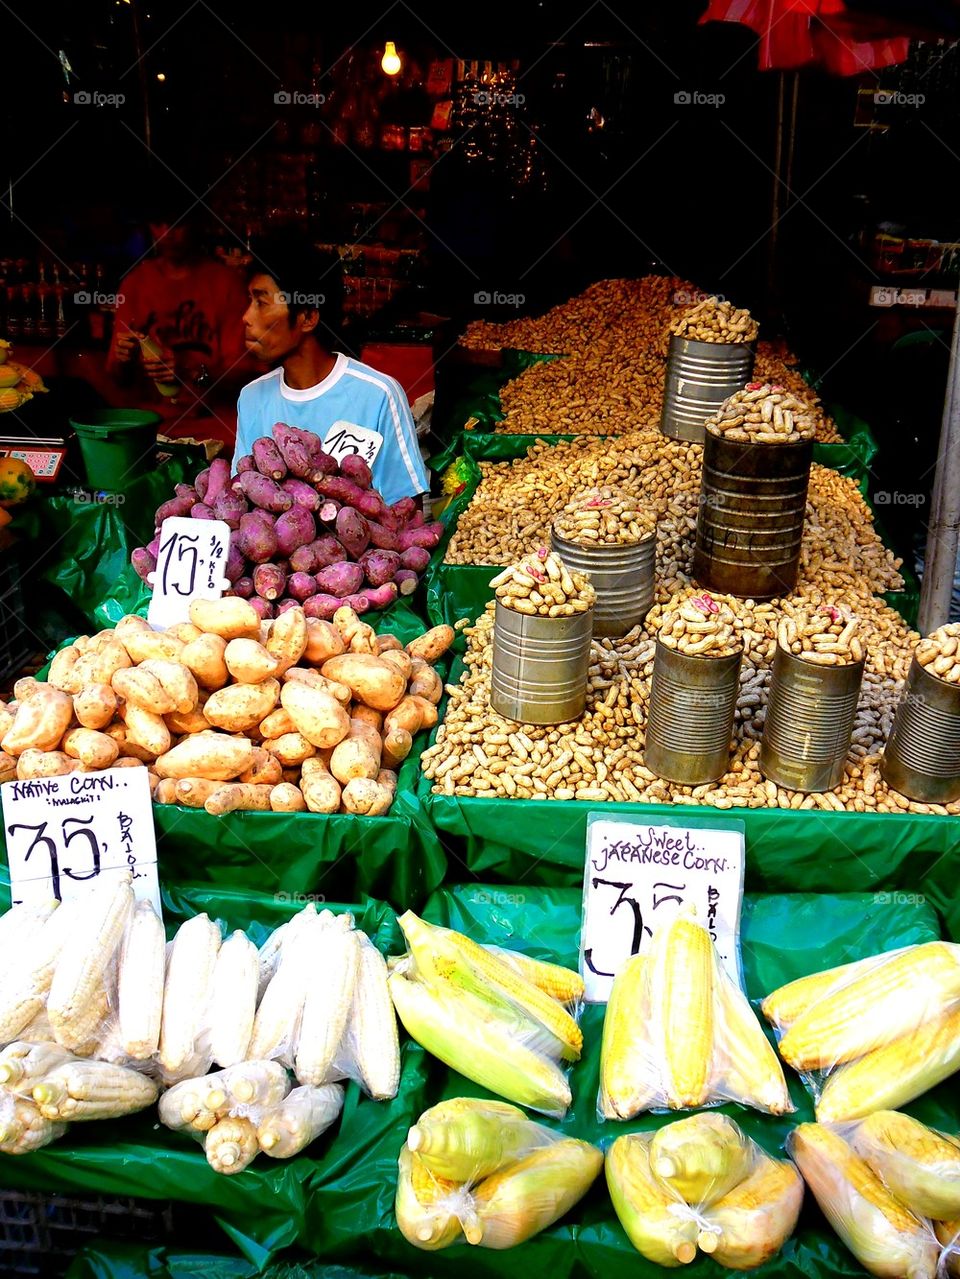 asian street vendor selling raw peanuts, corn and other food items in quiapo, manila, philippines in asia